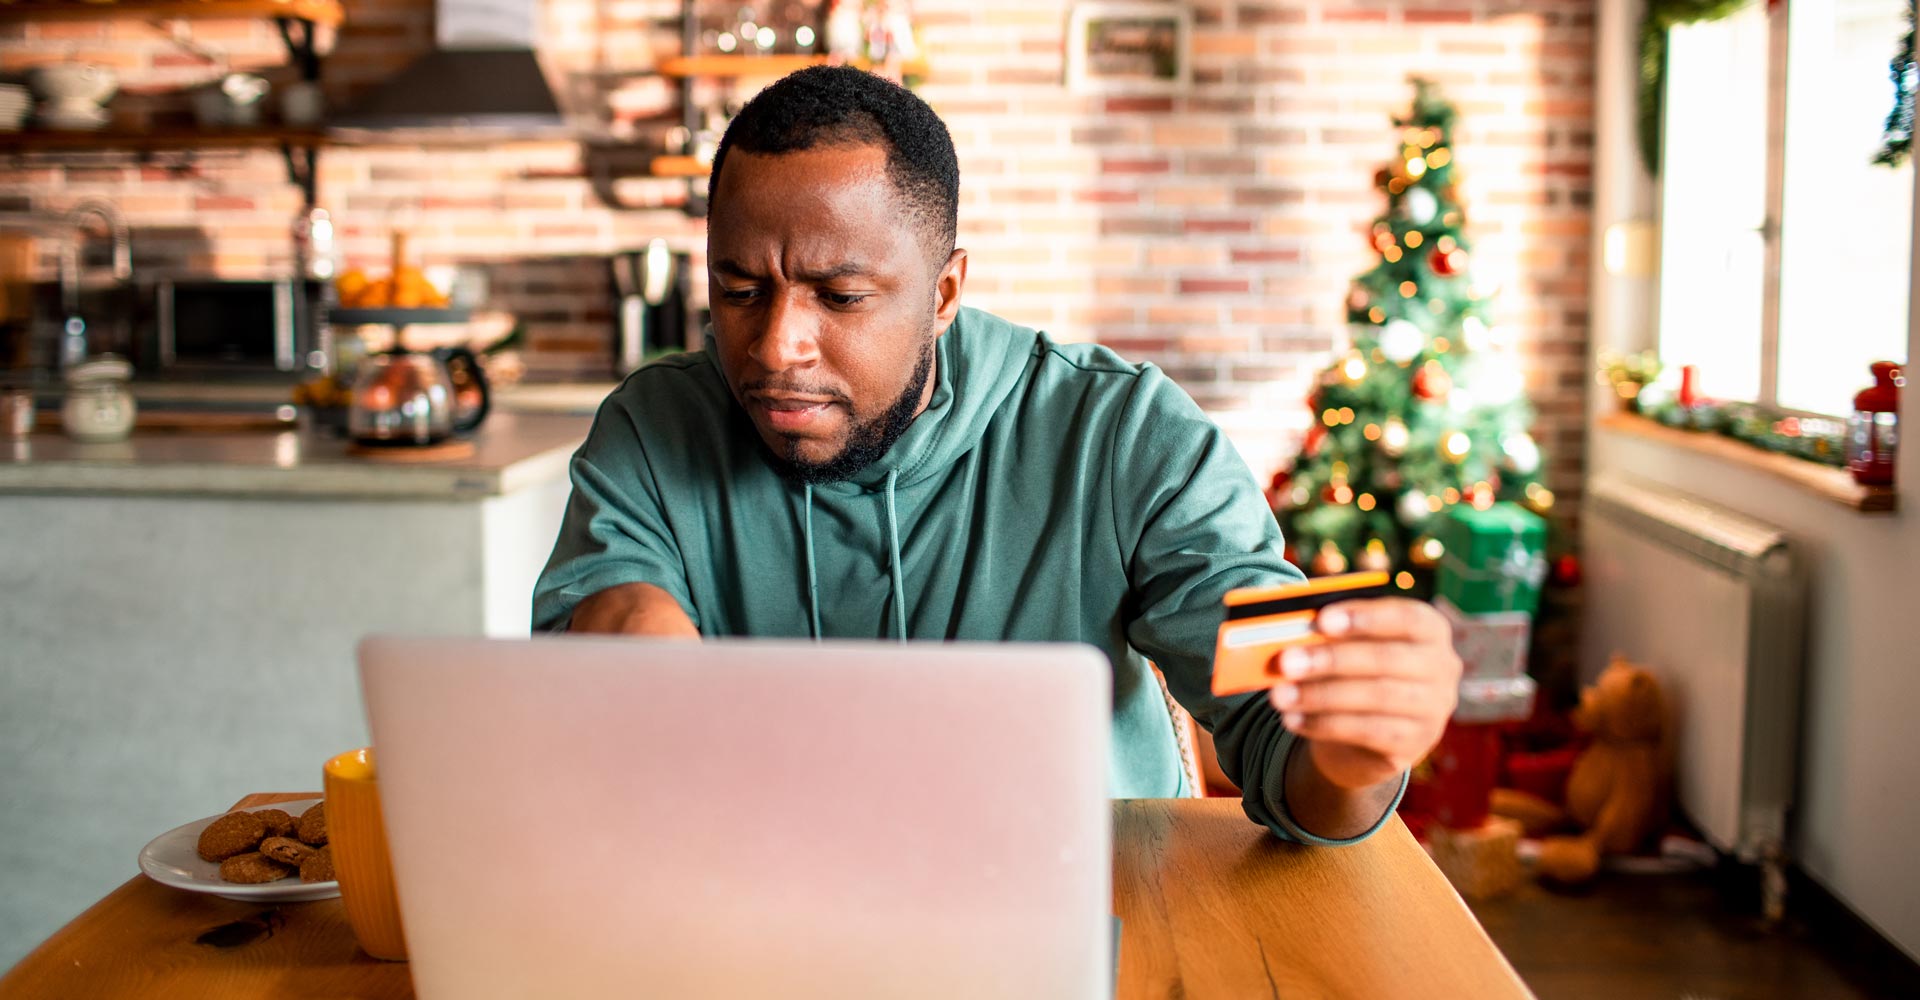 7 Scams Targeting Holiday Spenders In 2021 | Avast